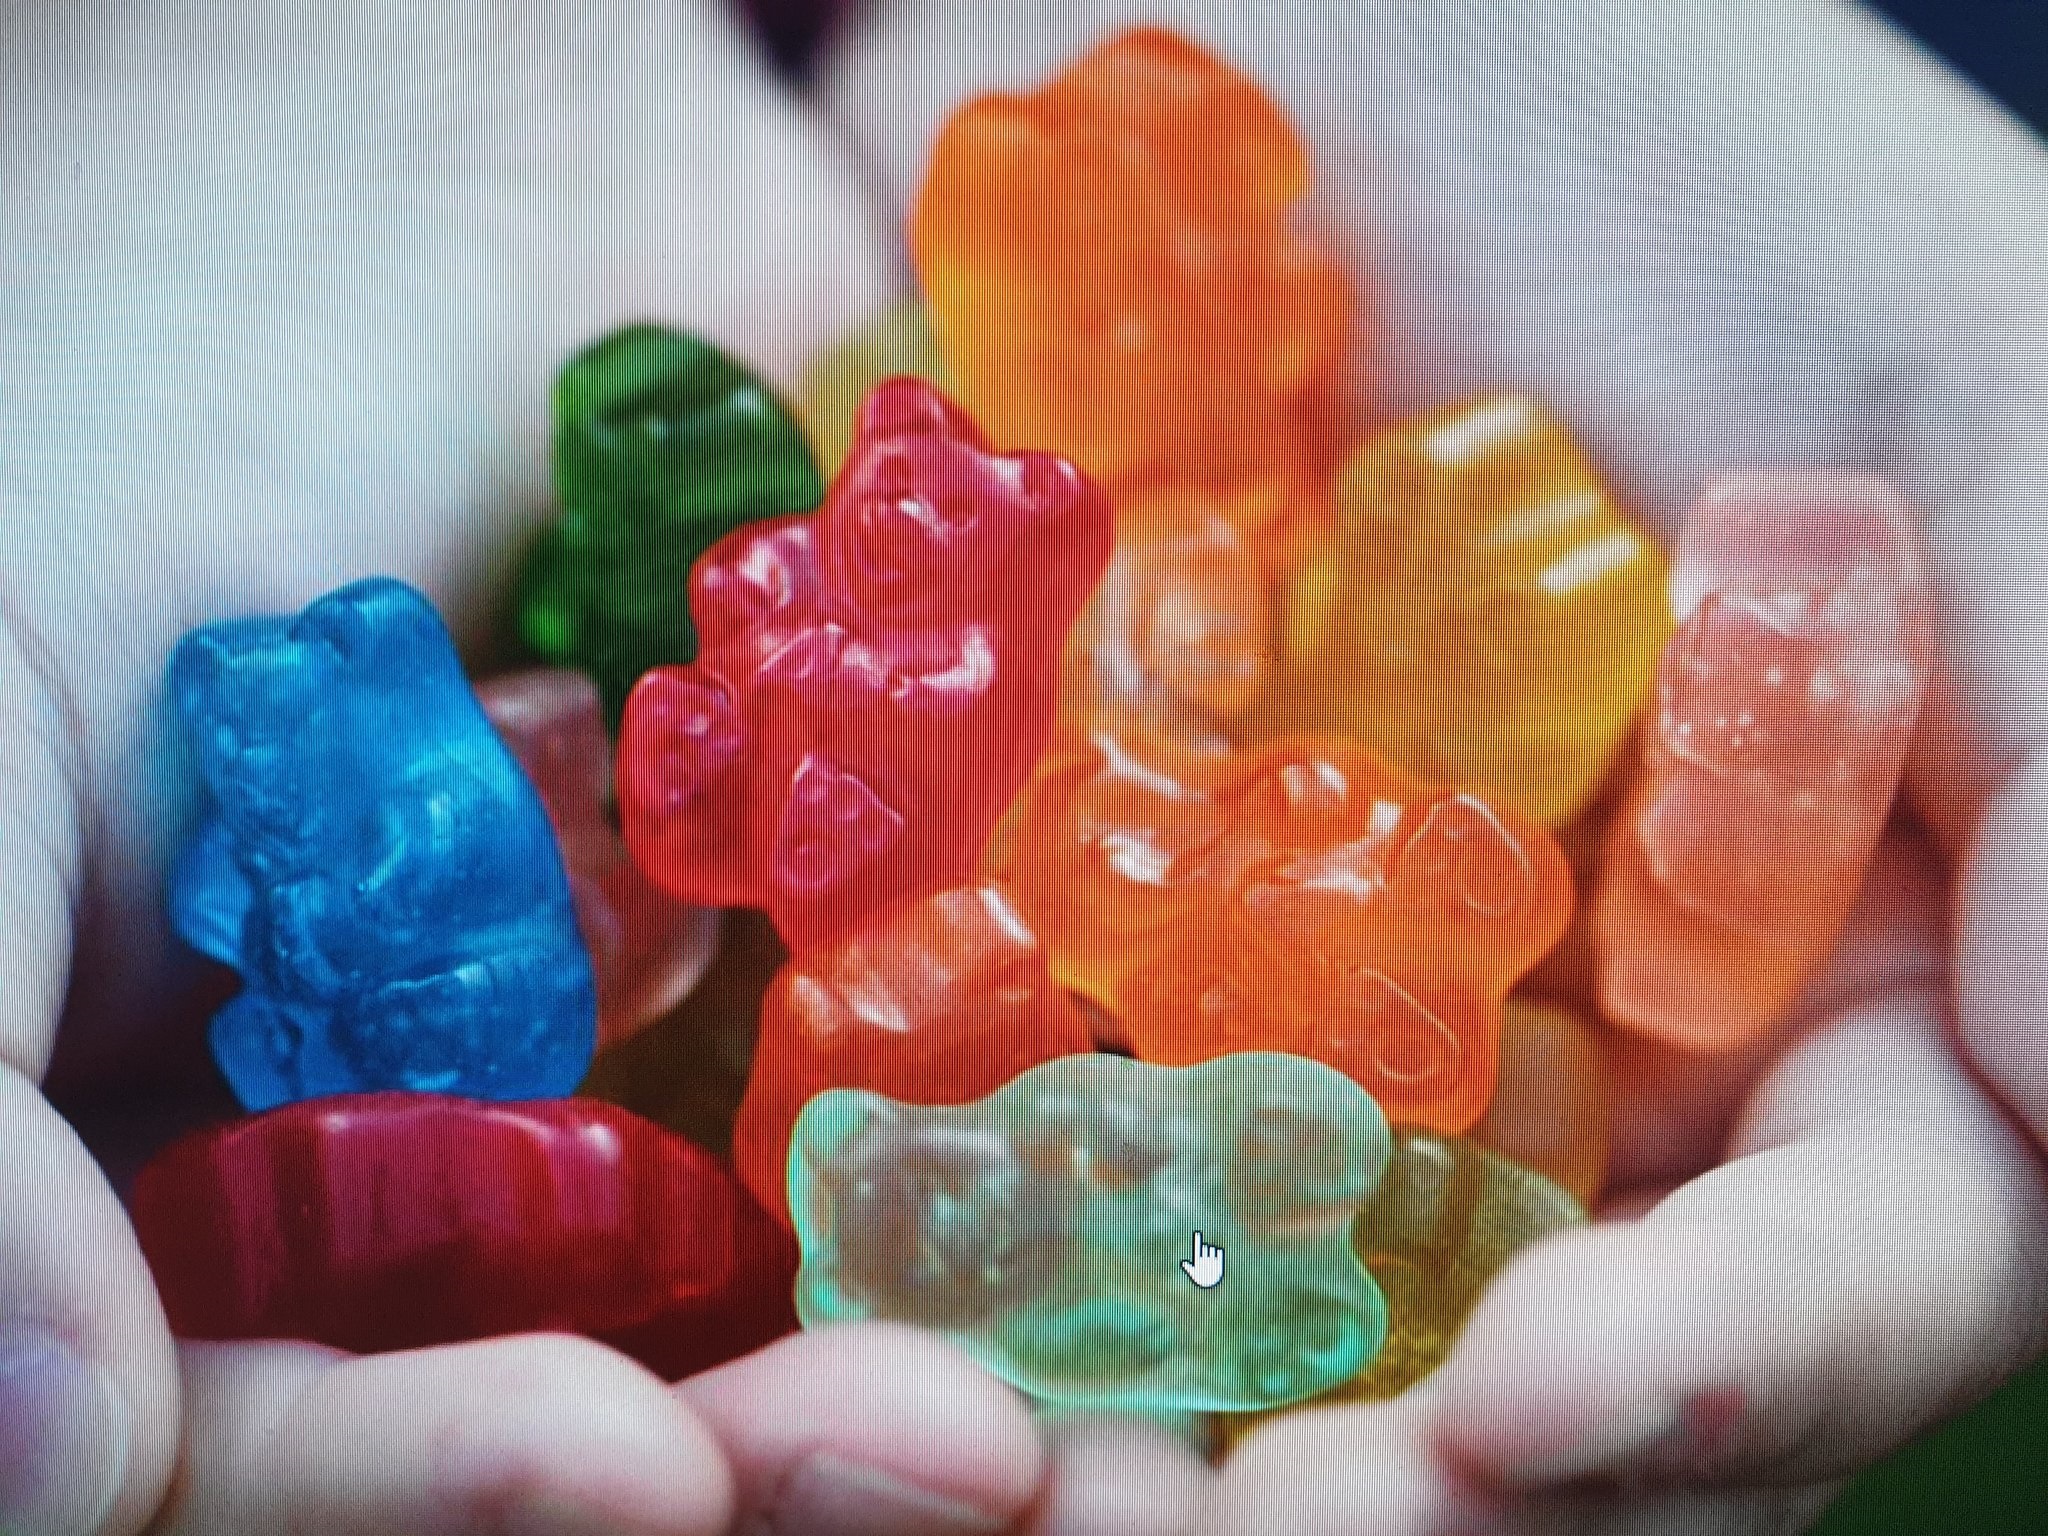 CBD gummies are allegedly being sold and passed around among local school kids.